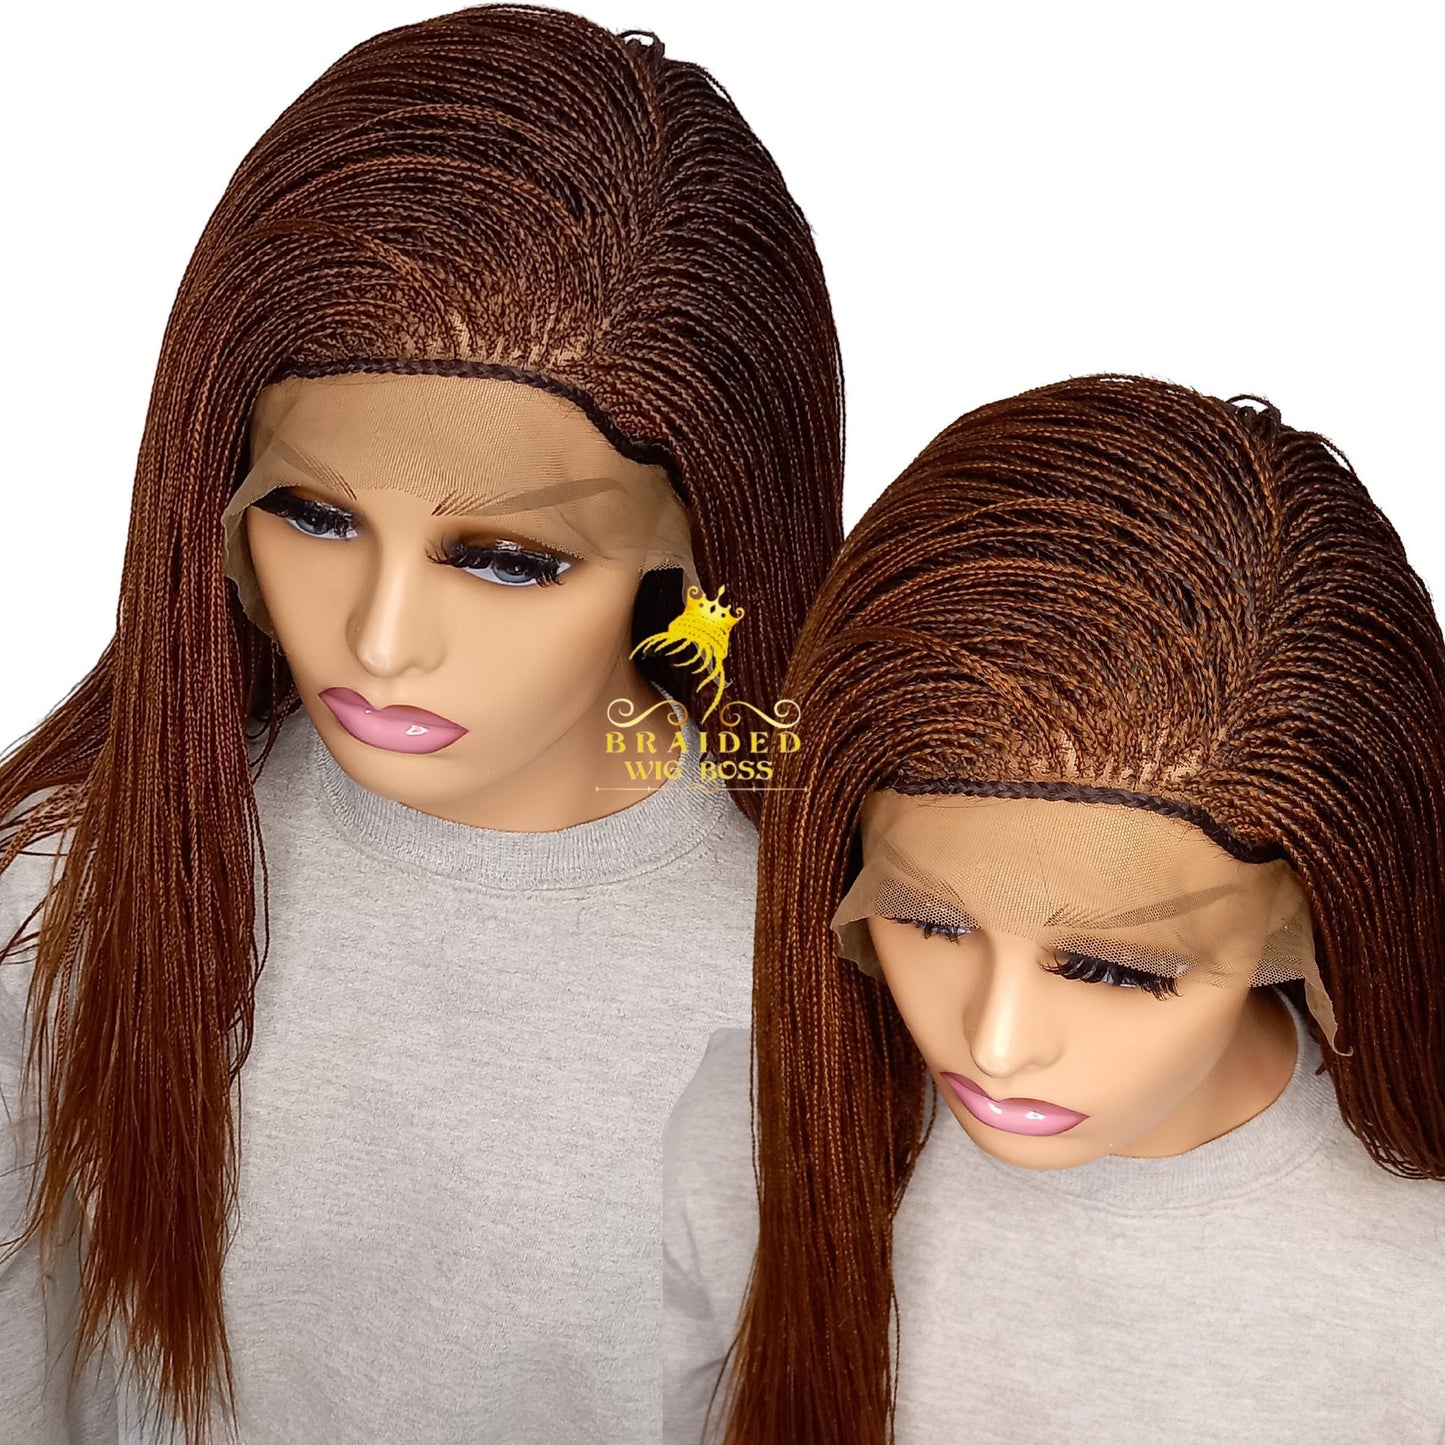 Micro Braided Wig for Black Women - 13x6 Braided Lace Wig, Auburn Color 30, 100% Handmade Box Braids Heat Resistant Synthetic with Baby Hair